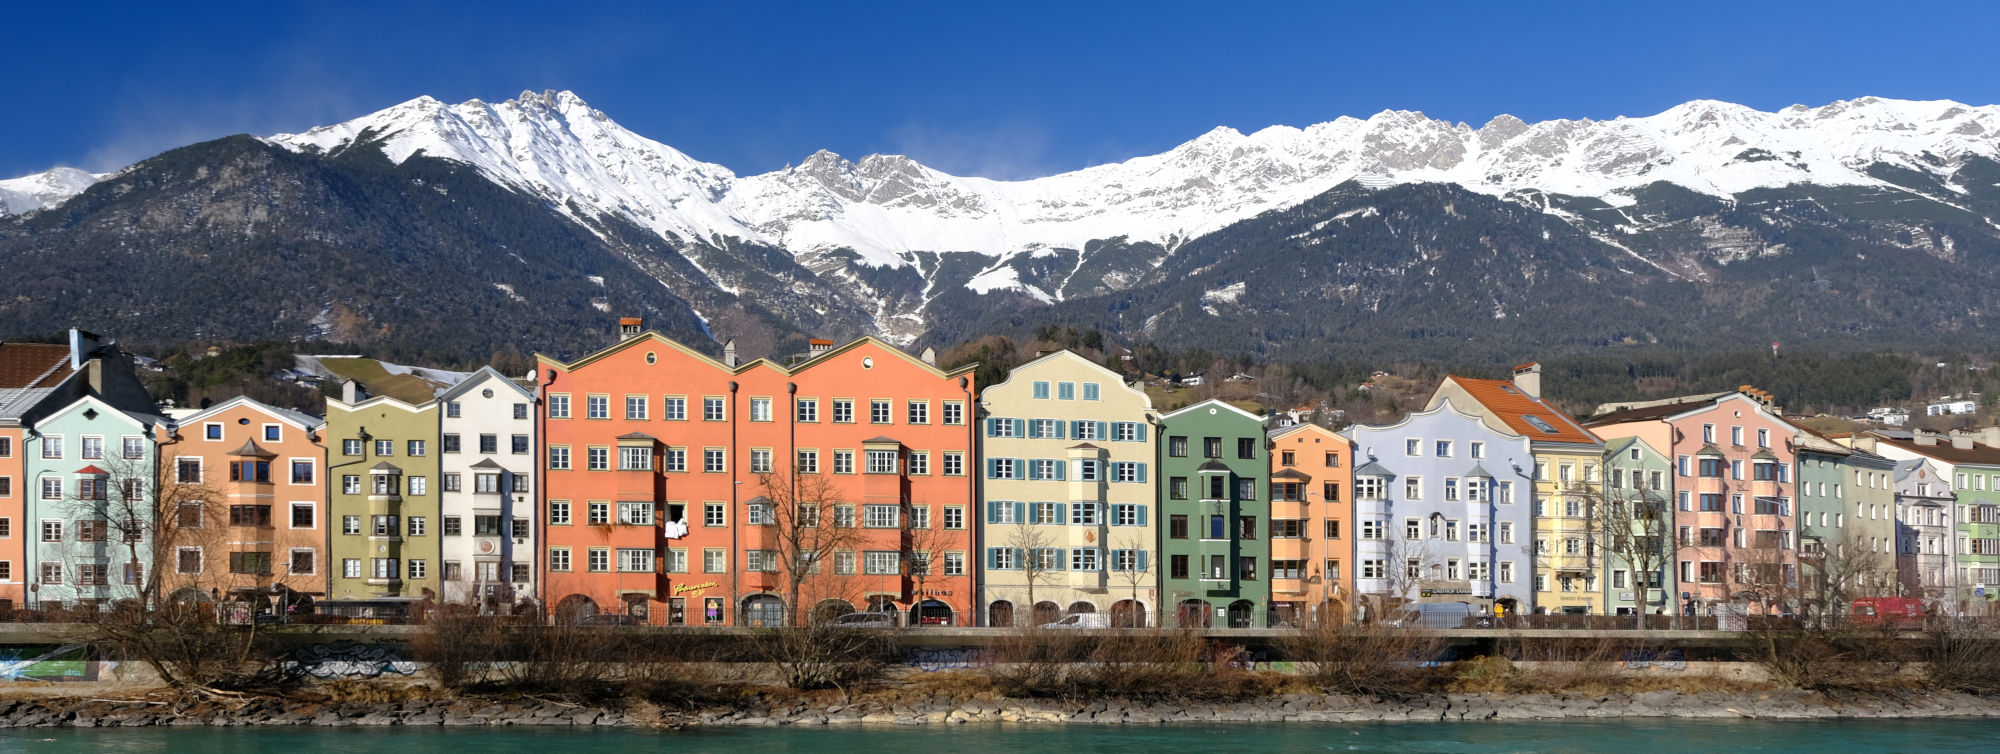 landscape format; row of coloured houses along the river; in the background snow capped mountains, blue sky